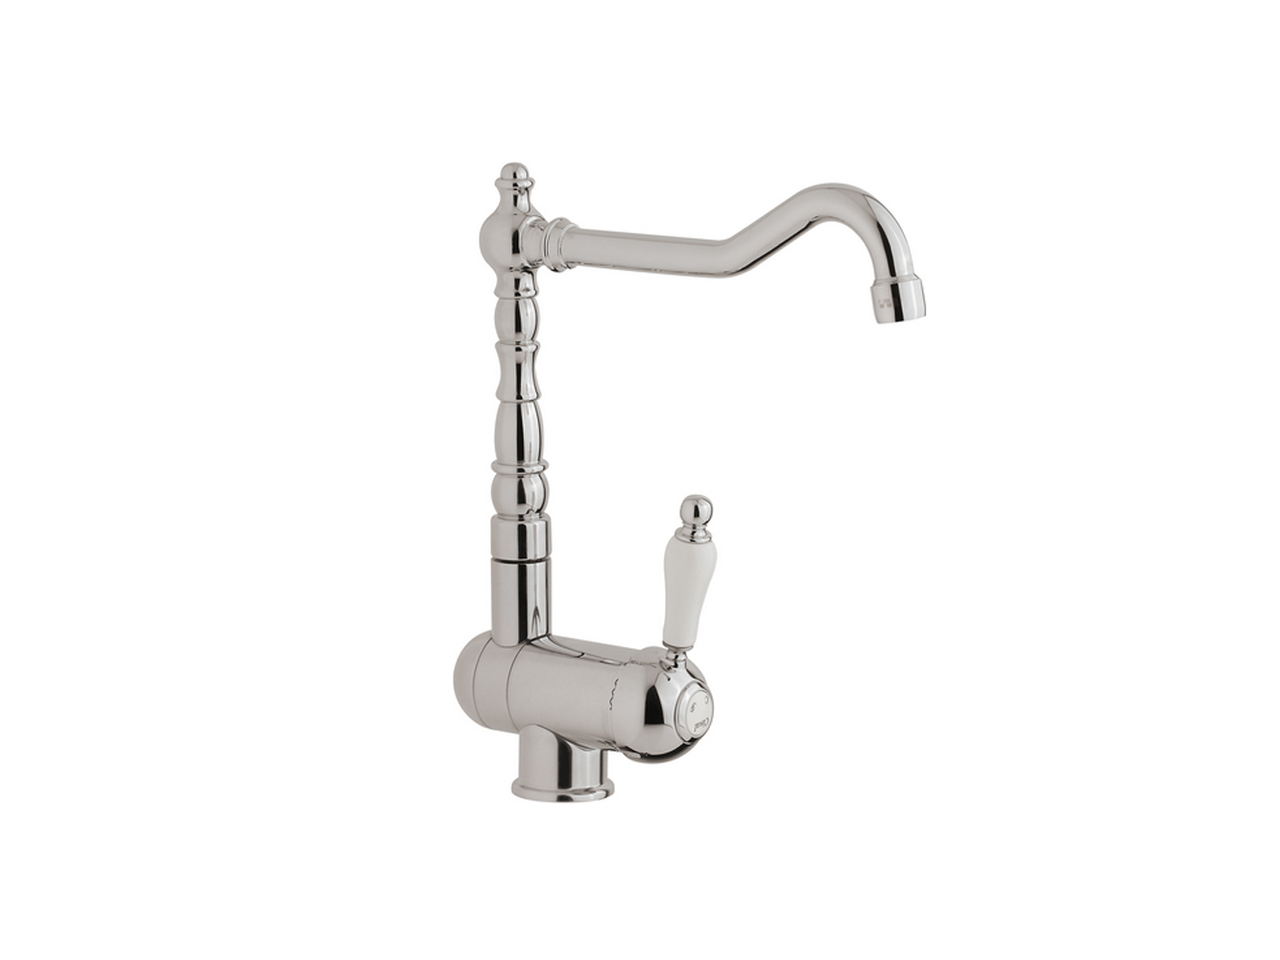 HUBERSingle lever sink mixer with reclined spout KITCHEN